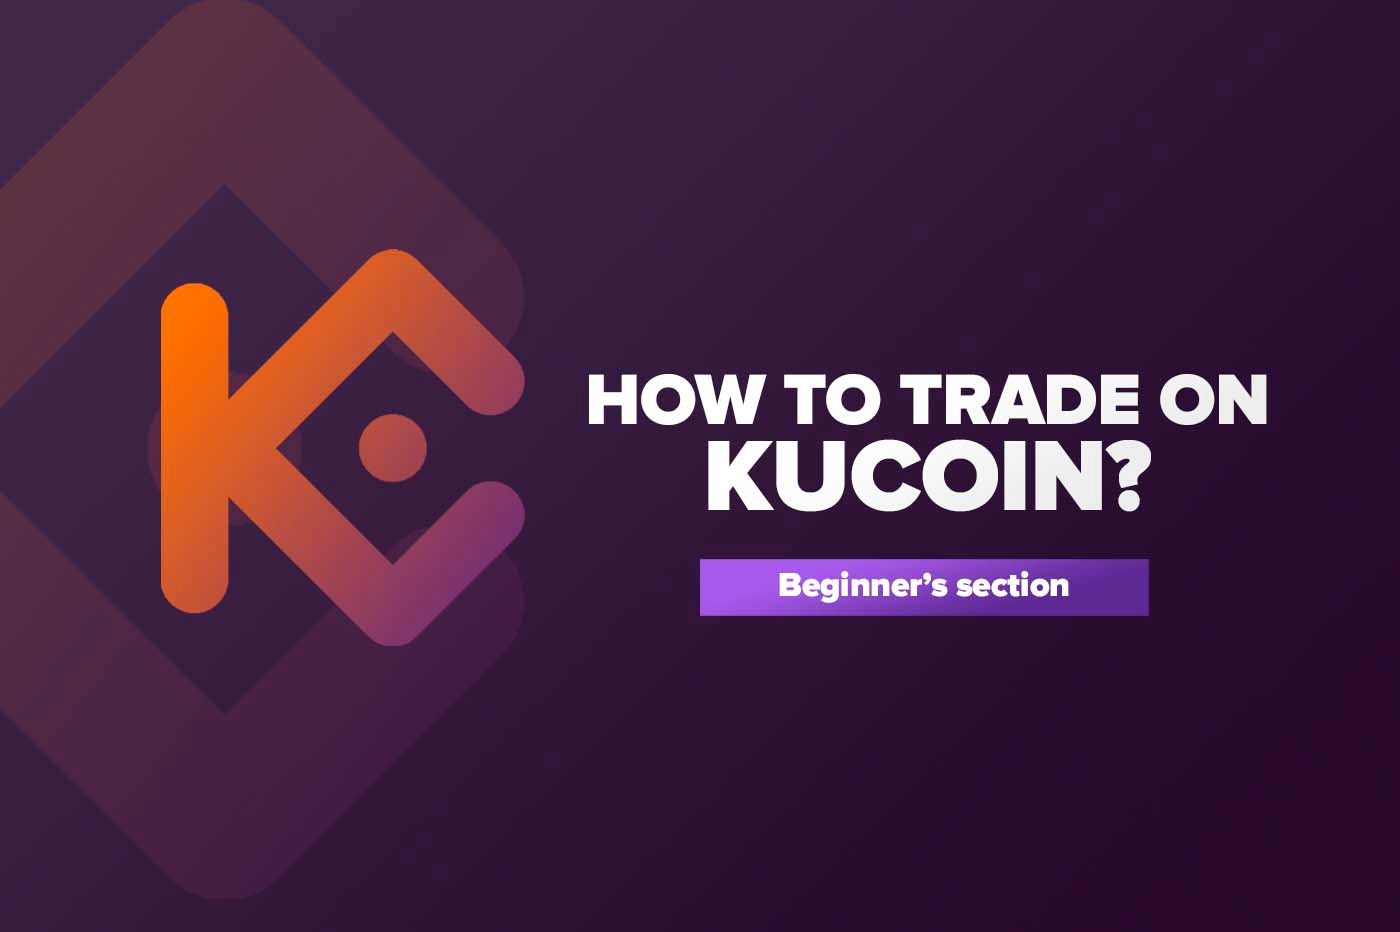 Article How to trade on KuCoin?